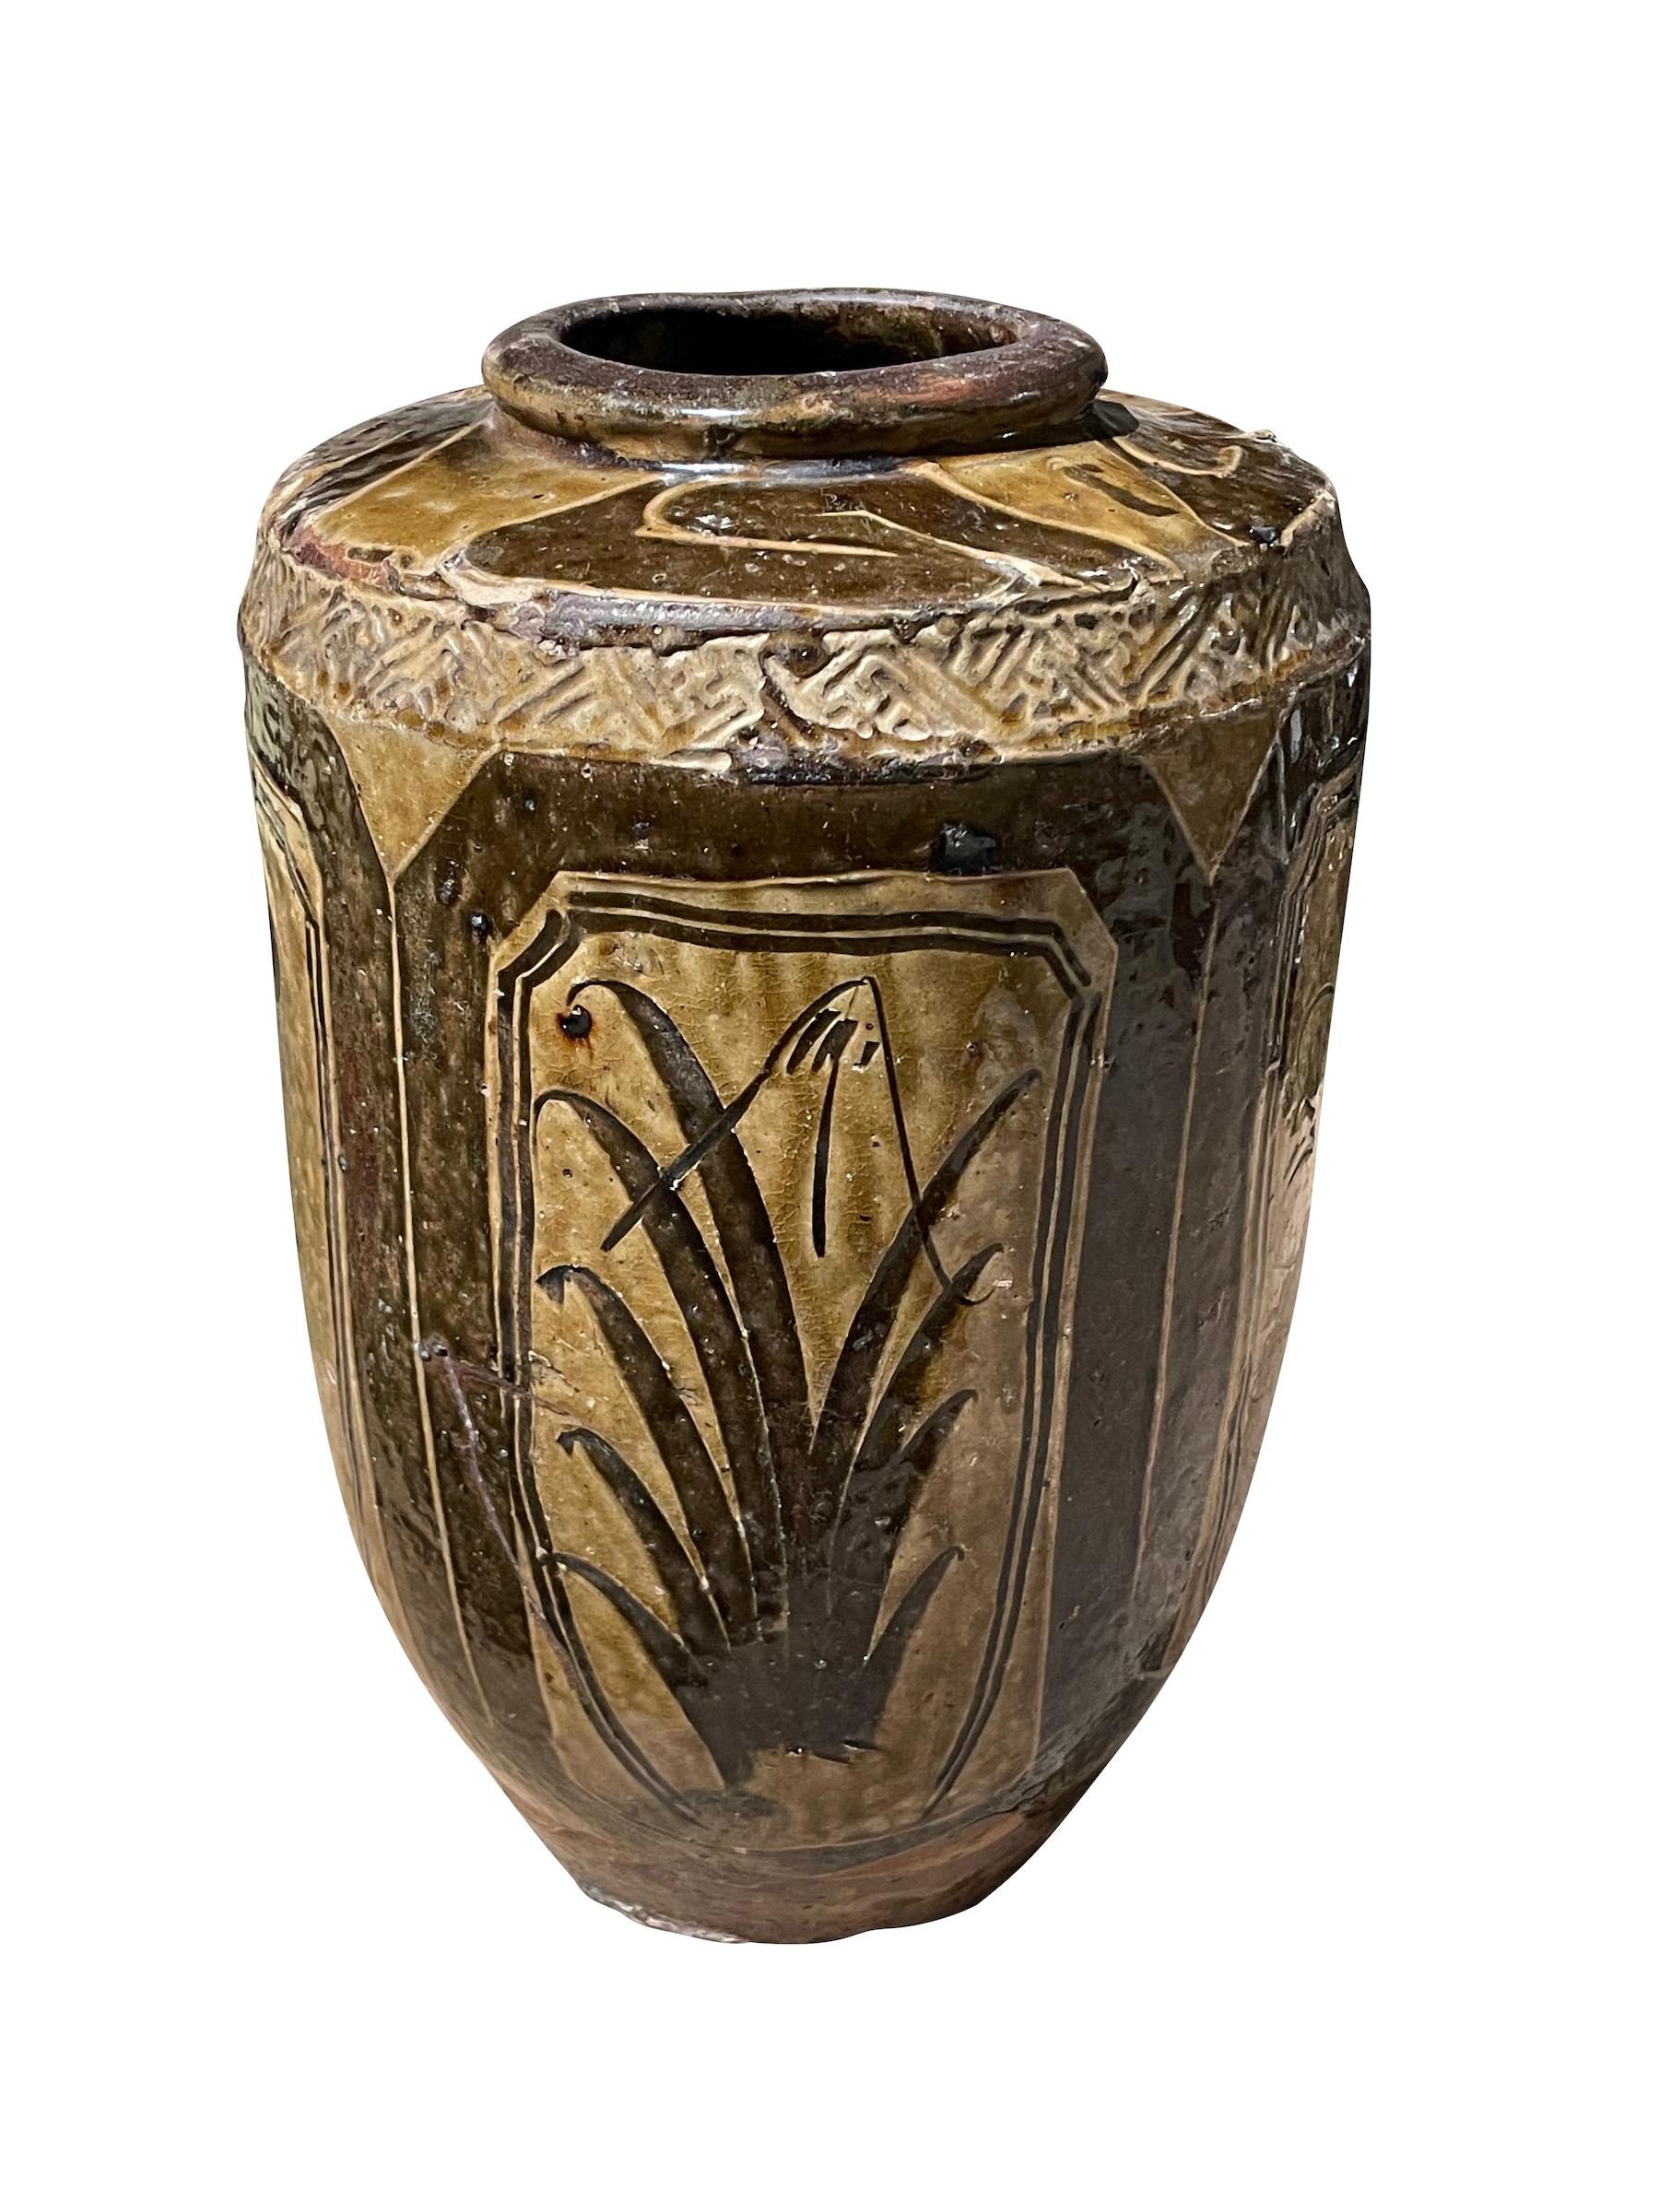 19thc Chinese barrel shaped vase in traditional olive/gold glaze.
Natural aged patina and wear.
Palm motif design.
Part of a large collection.
ARRIVING APRIL